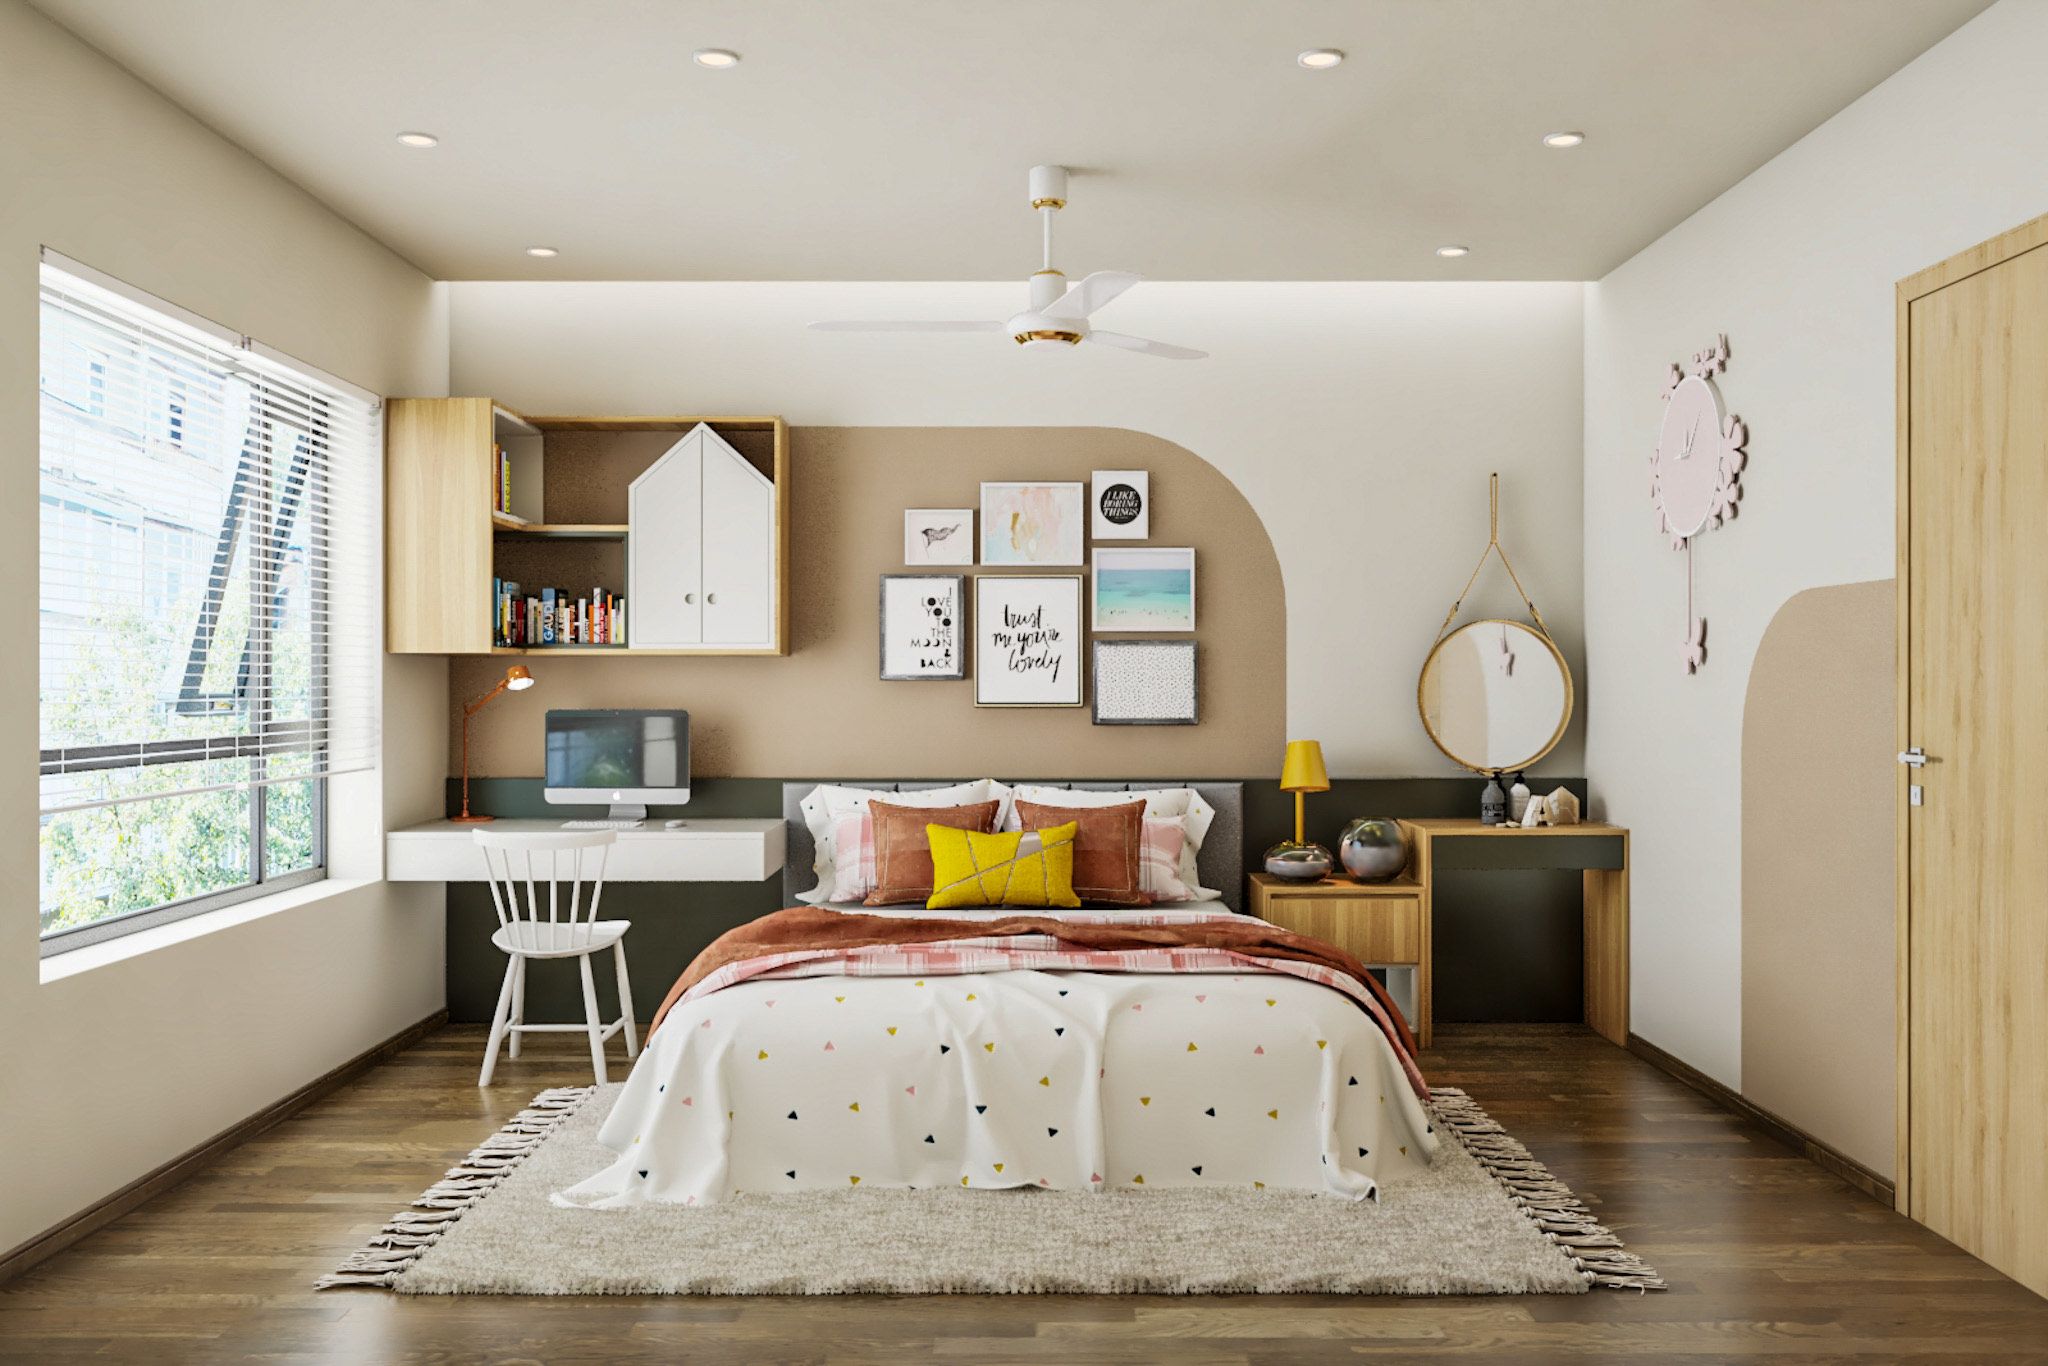 Modern Kids Bedroom Design With A King Size Bed And Study Unit